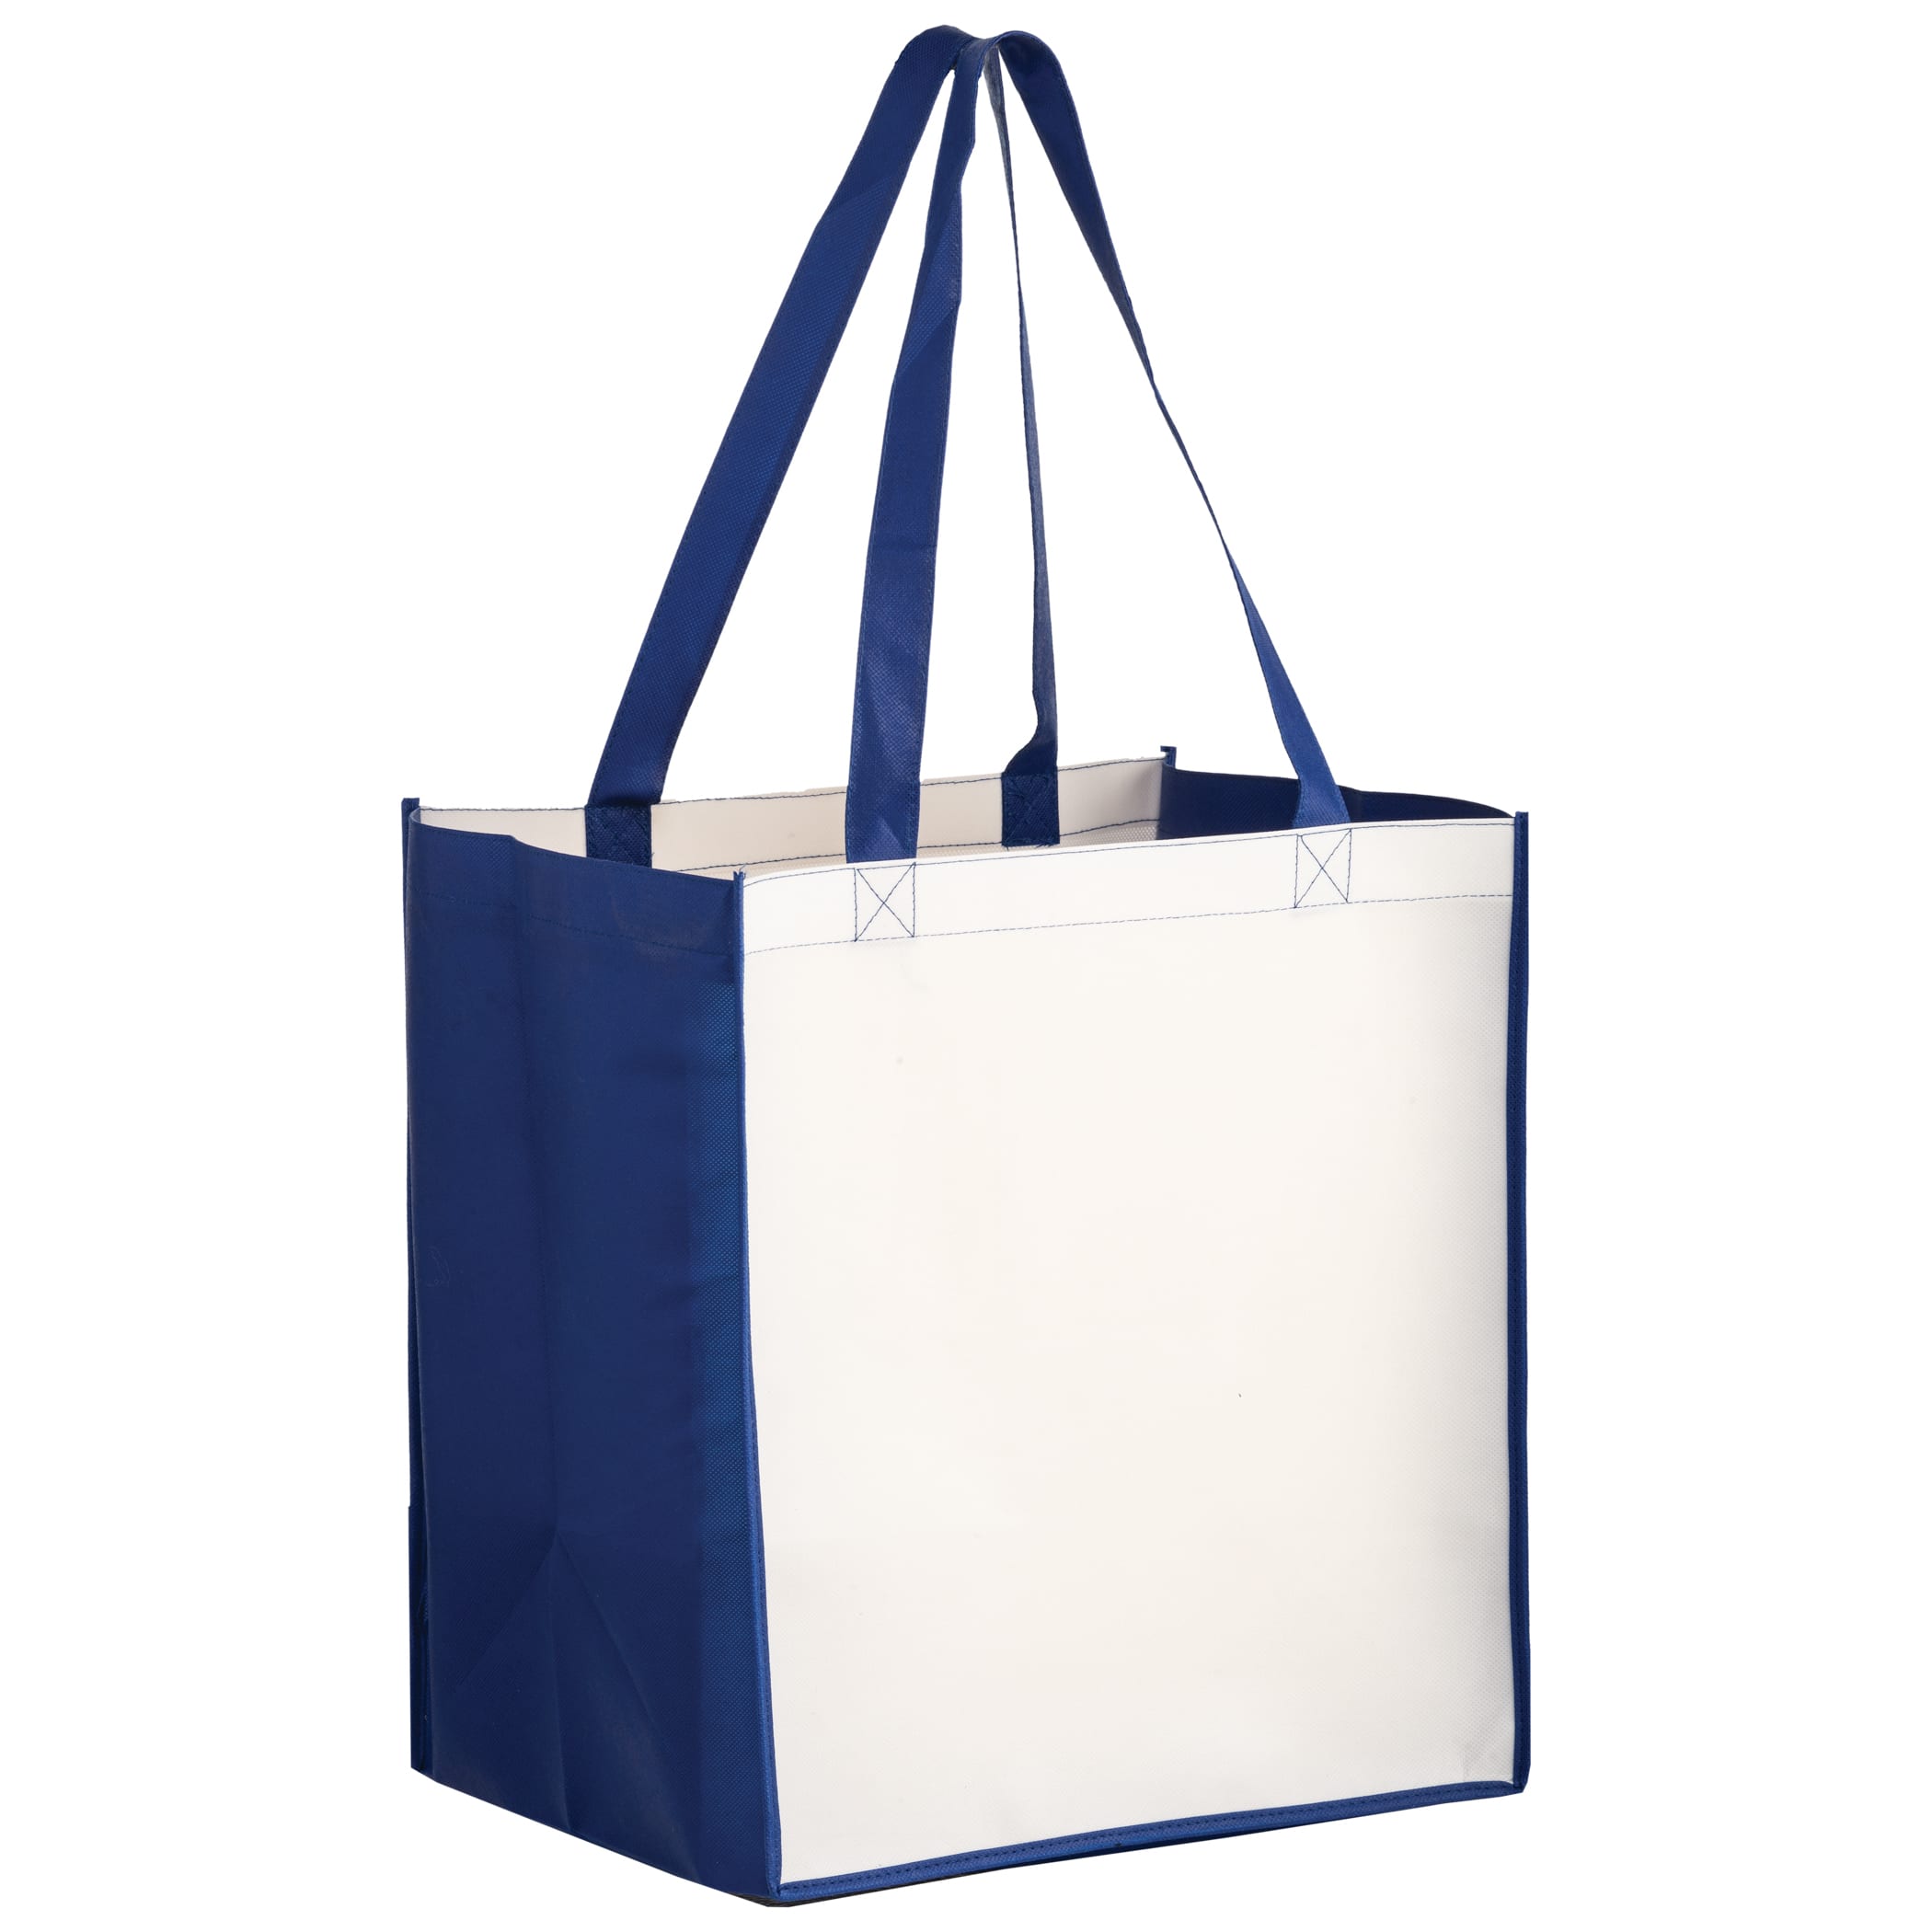 Laminated Non Woven Bag - Get Customised Bag At Lowest Price